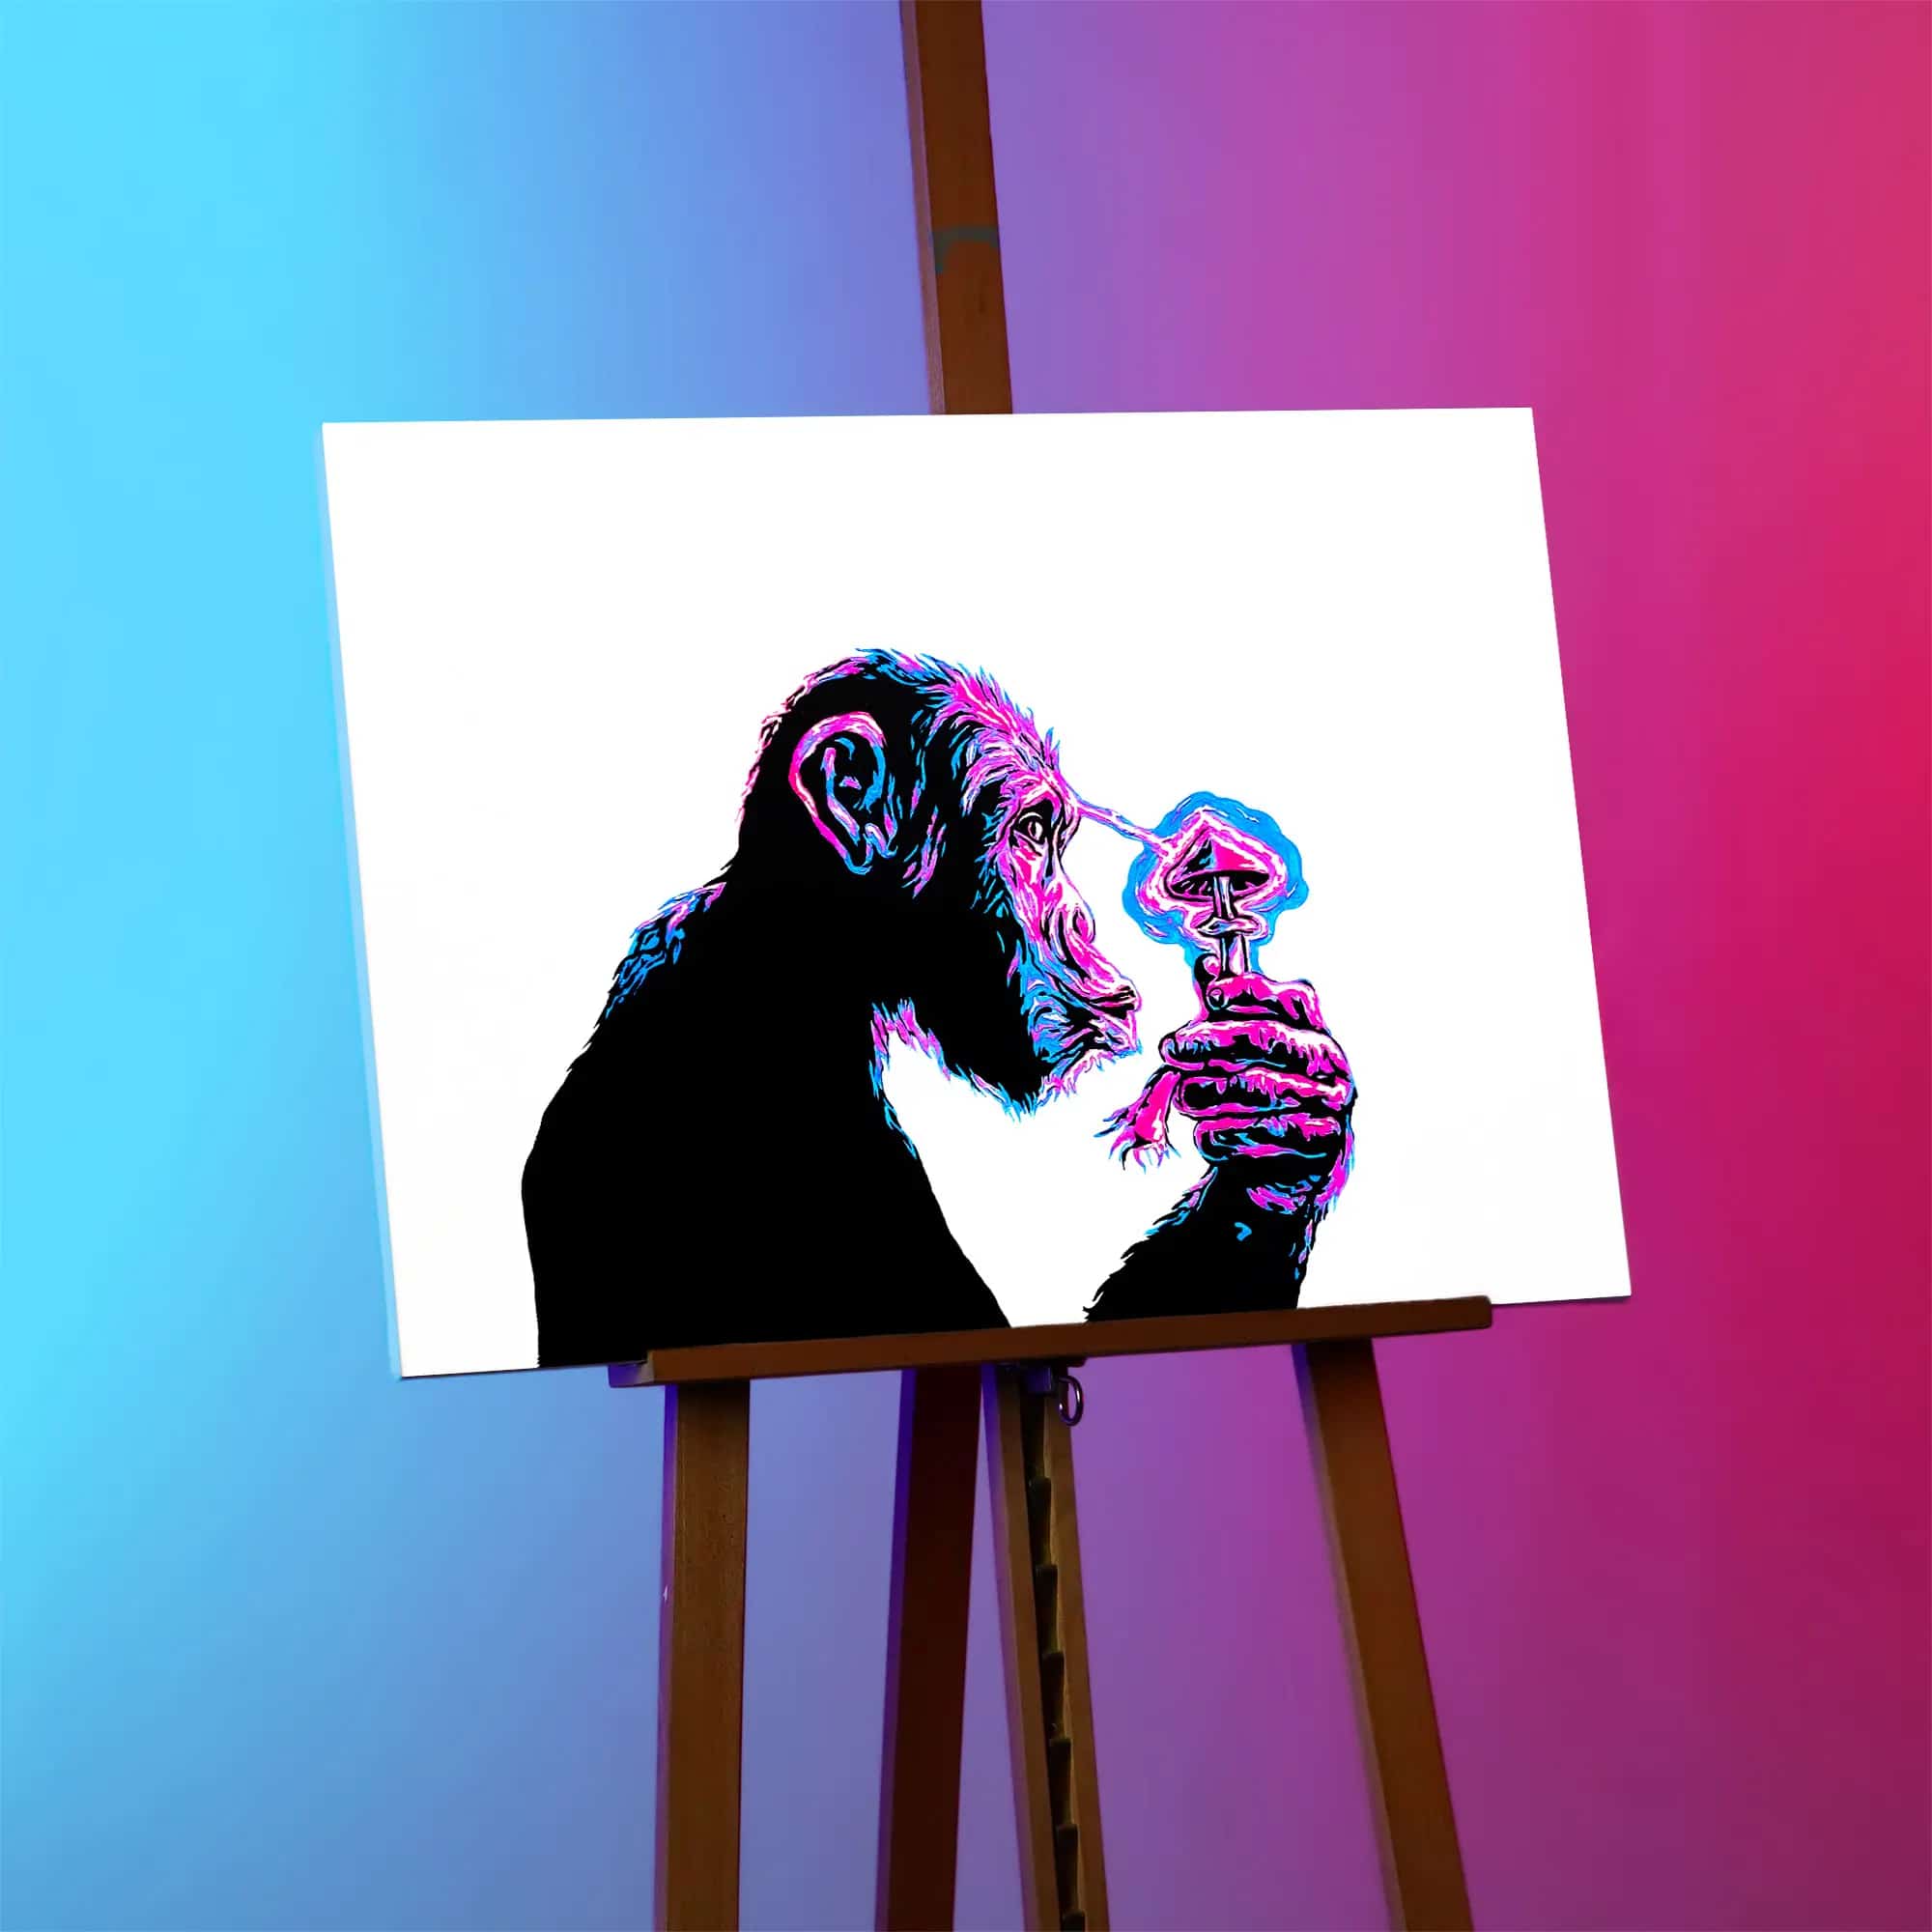 Daytime Effect of Stoned Ape portrait - Unique retro wall art capturing the stoned ape concept, with a subtle glow in the dark touch.